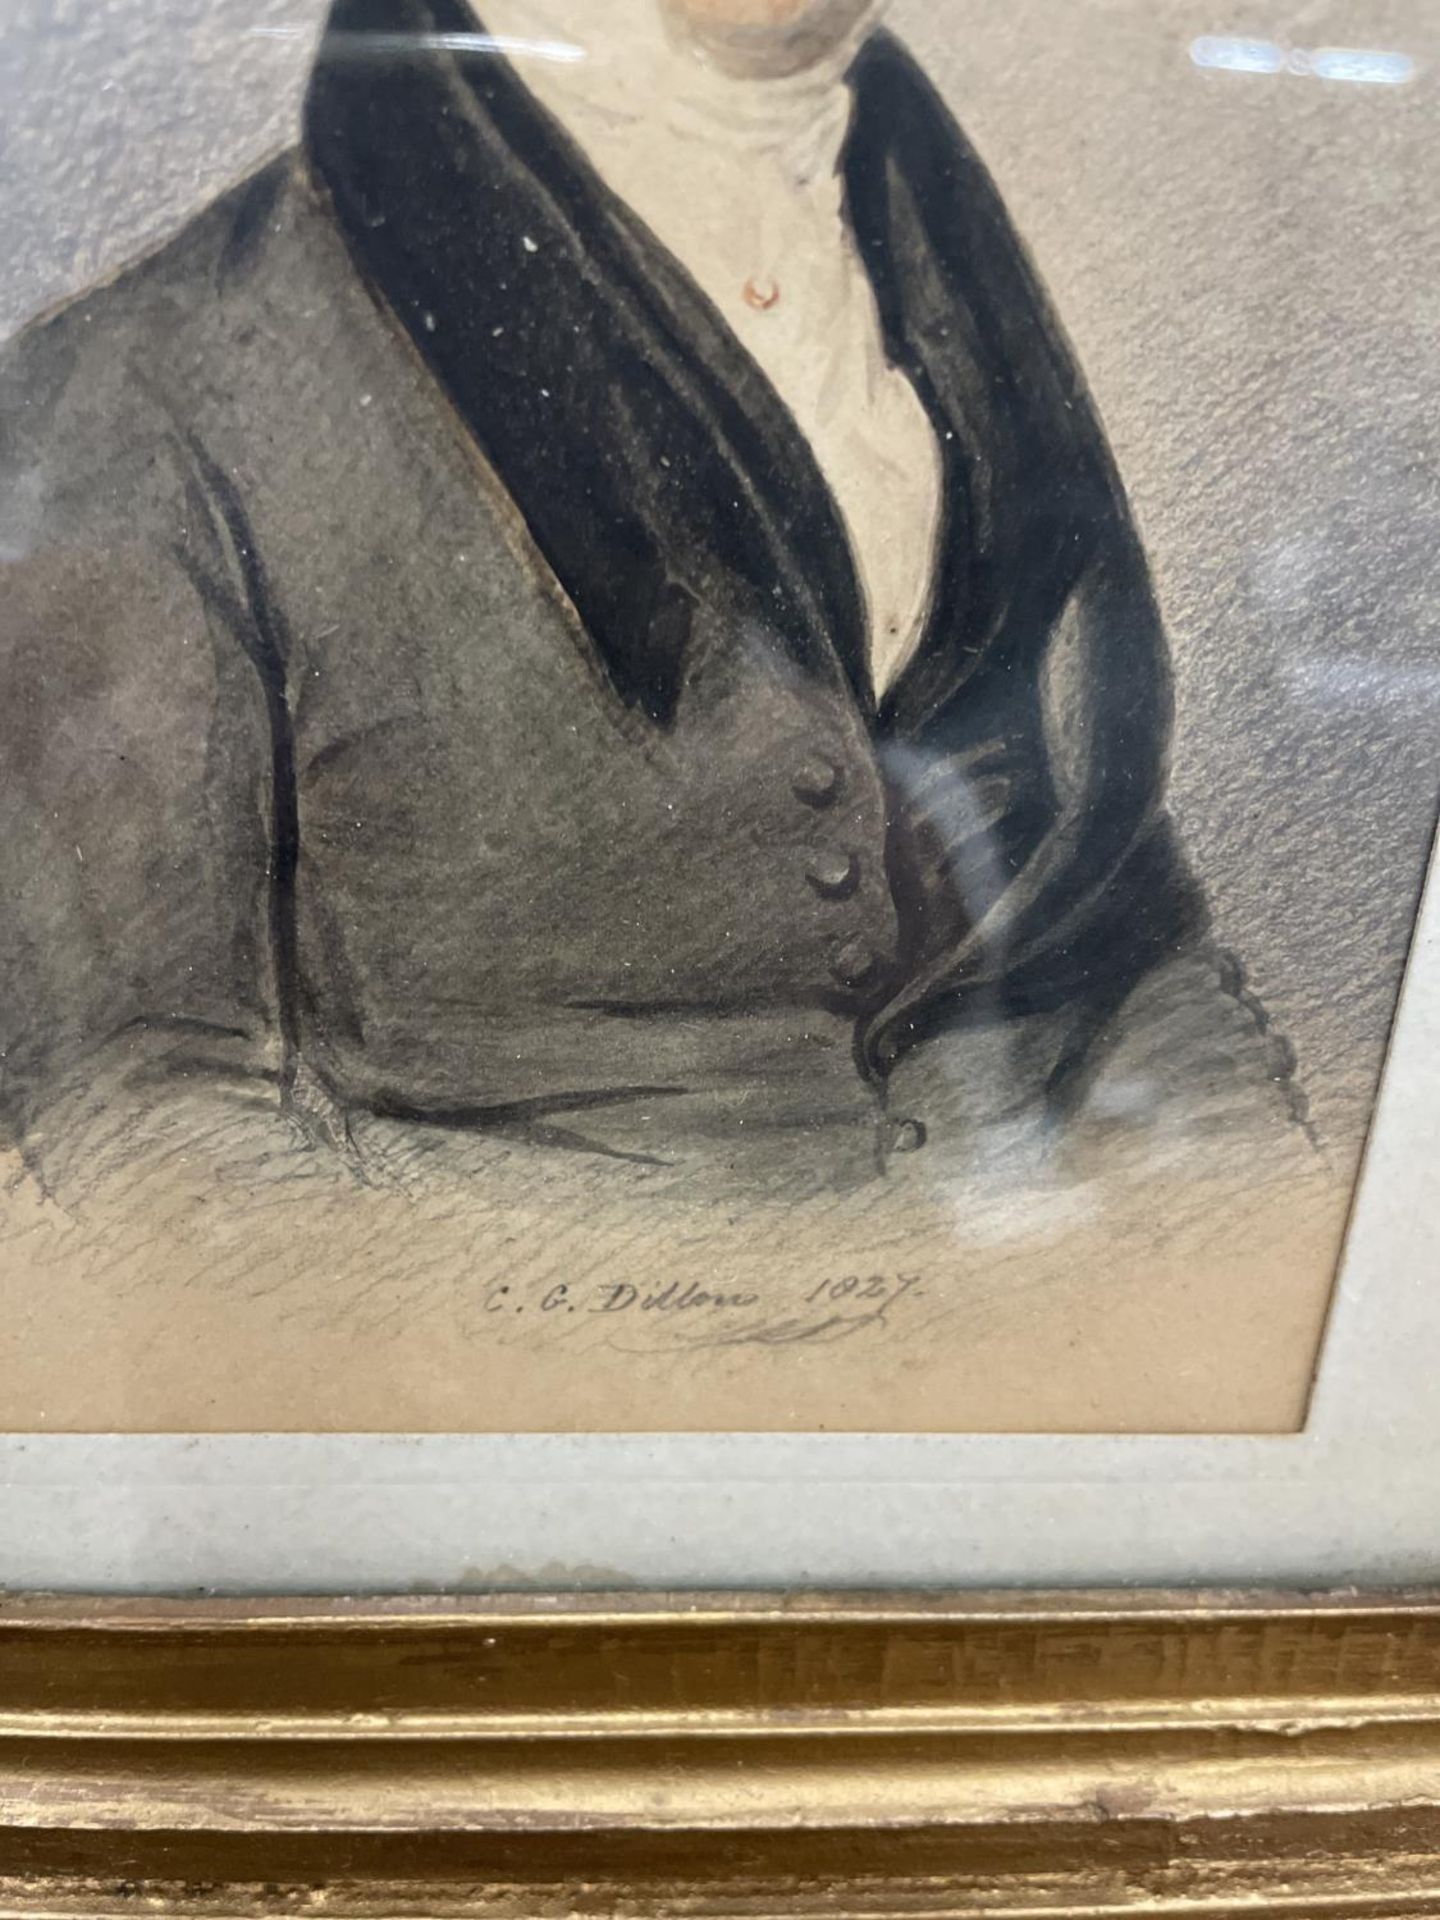 A GILT FRAMED PRINT OF A YOUNG GENTLEMAN IN WATERCOLOUR BY C.G.DILLON 1827, 7.5" X 6" - Image 3 of 3